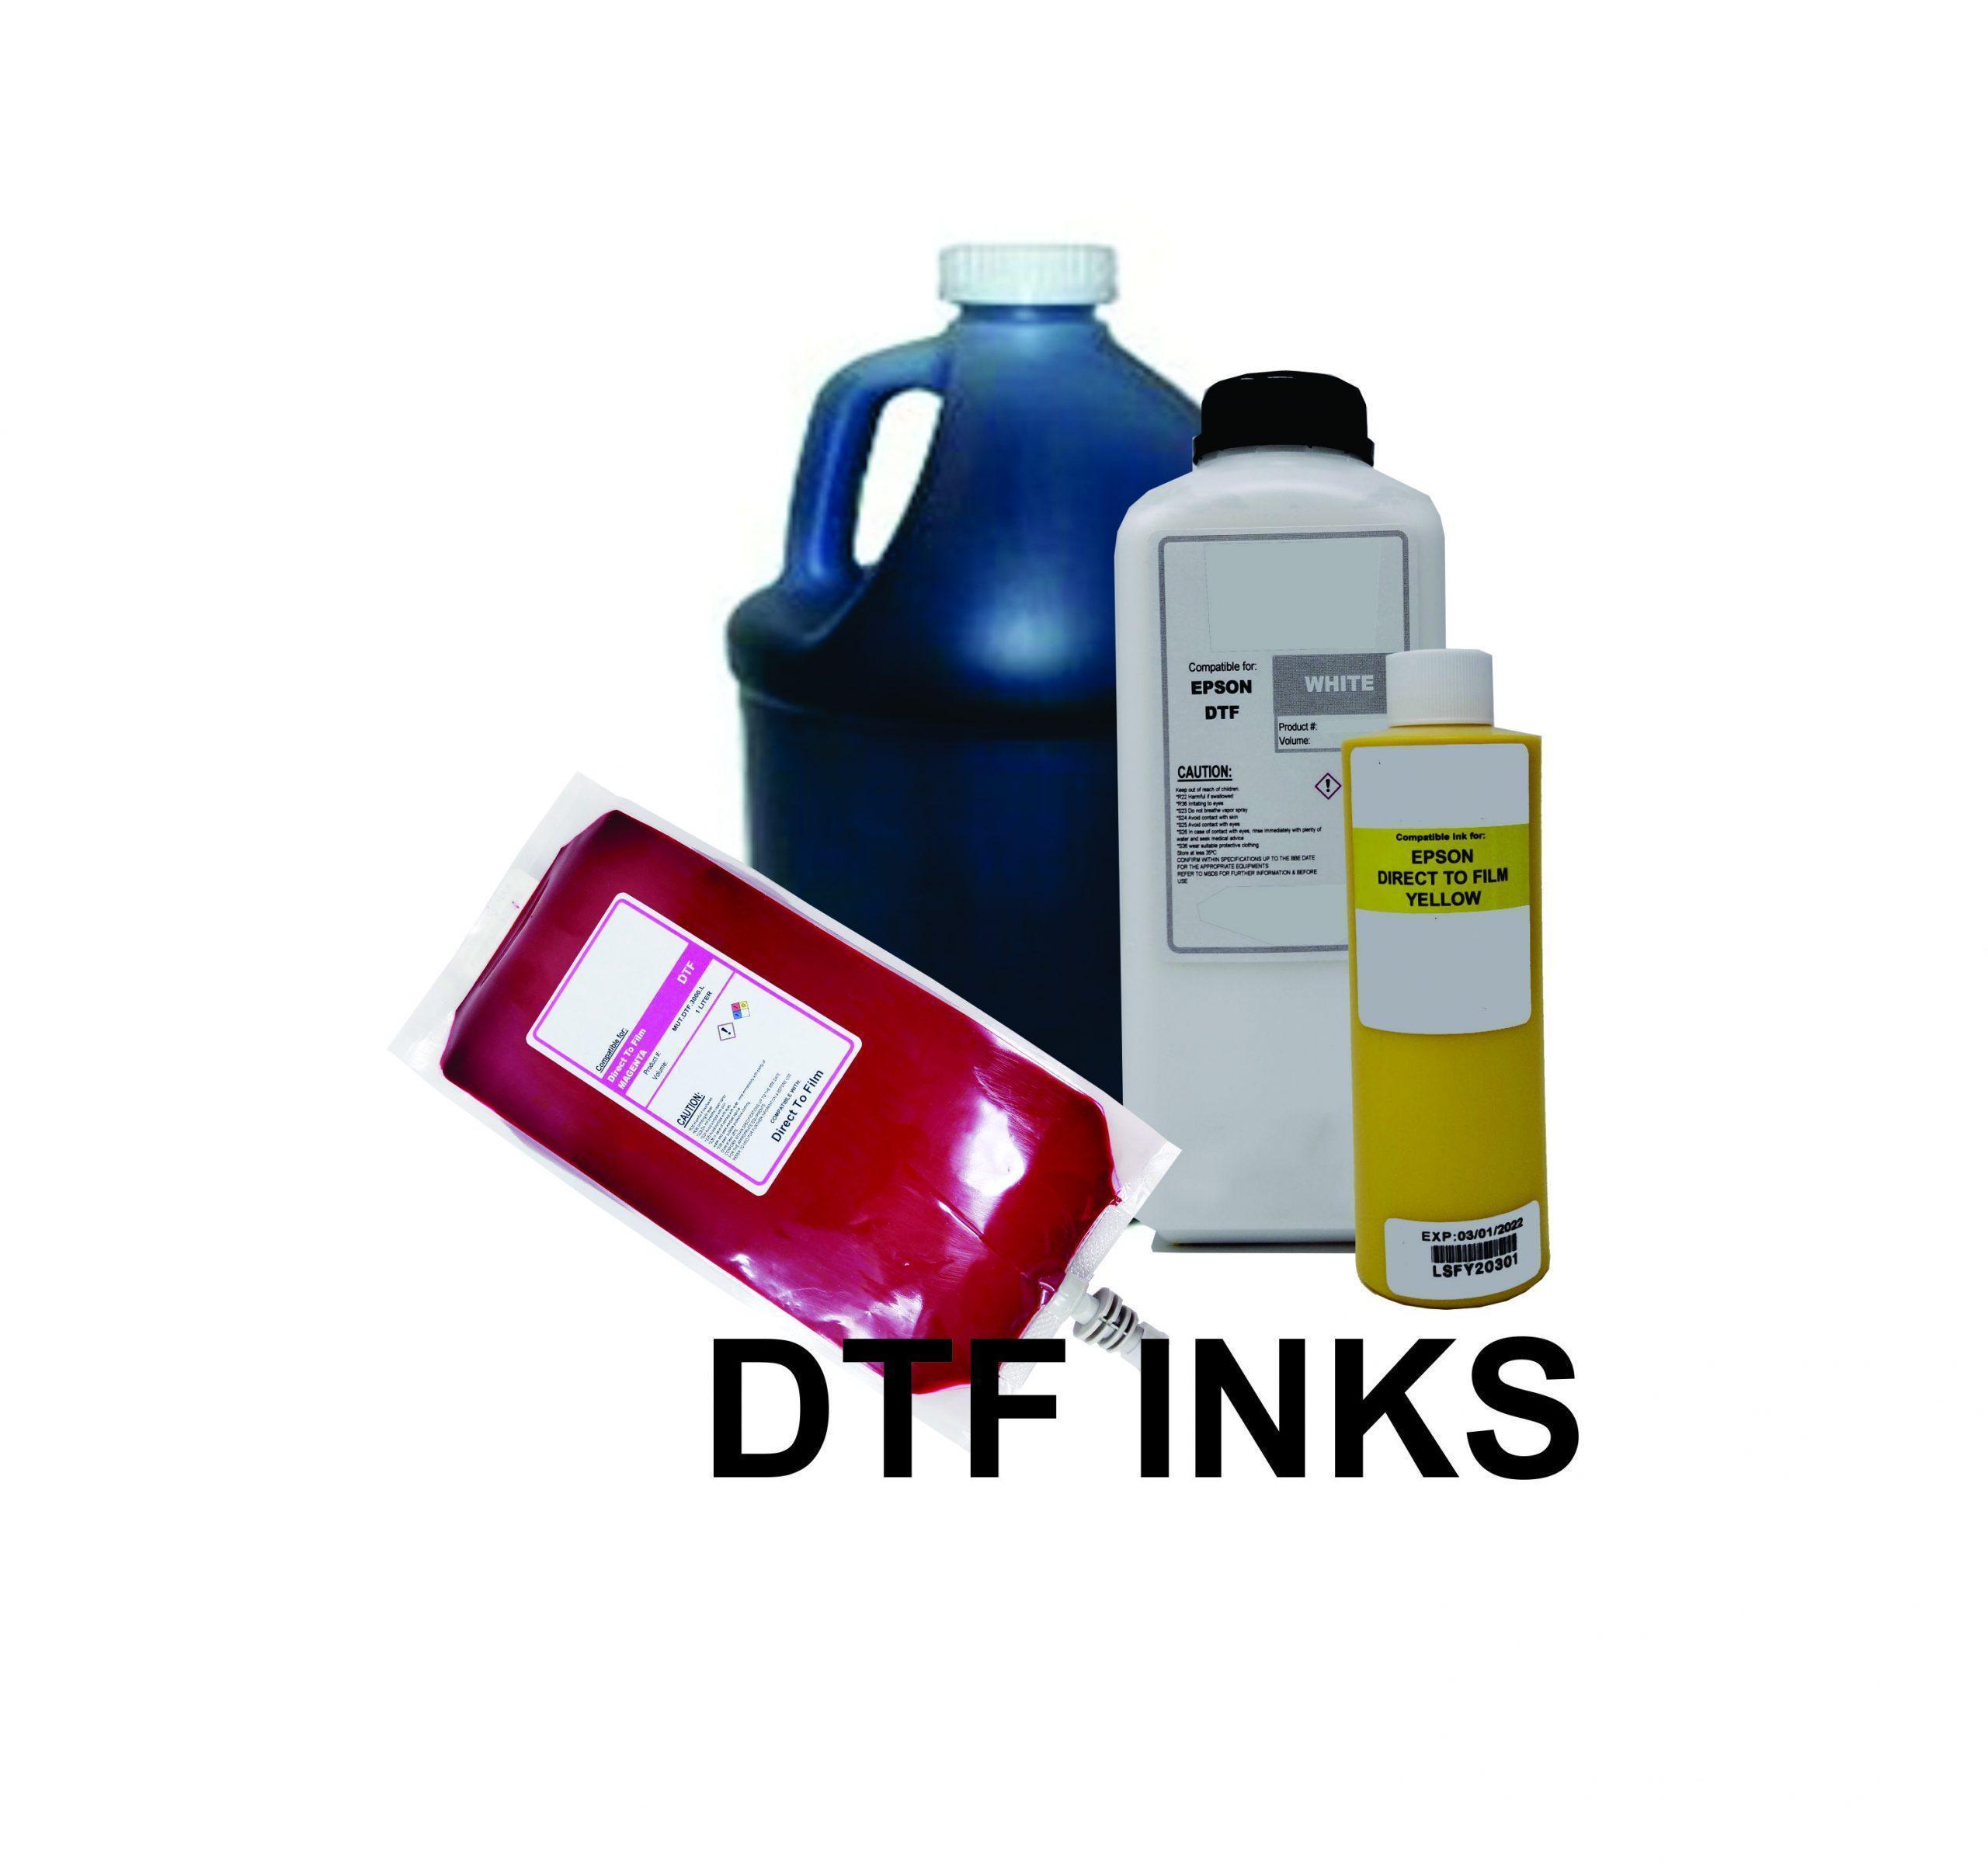 DTF Transfer Inks DTF textile printing ink is manufactured in the